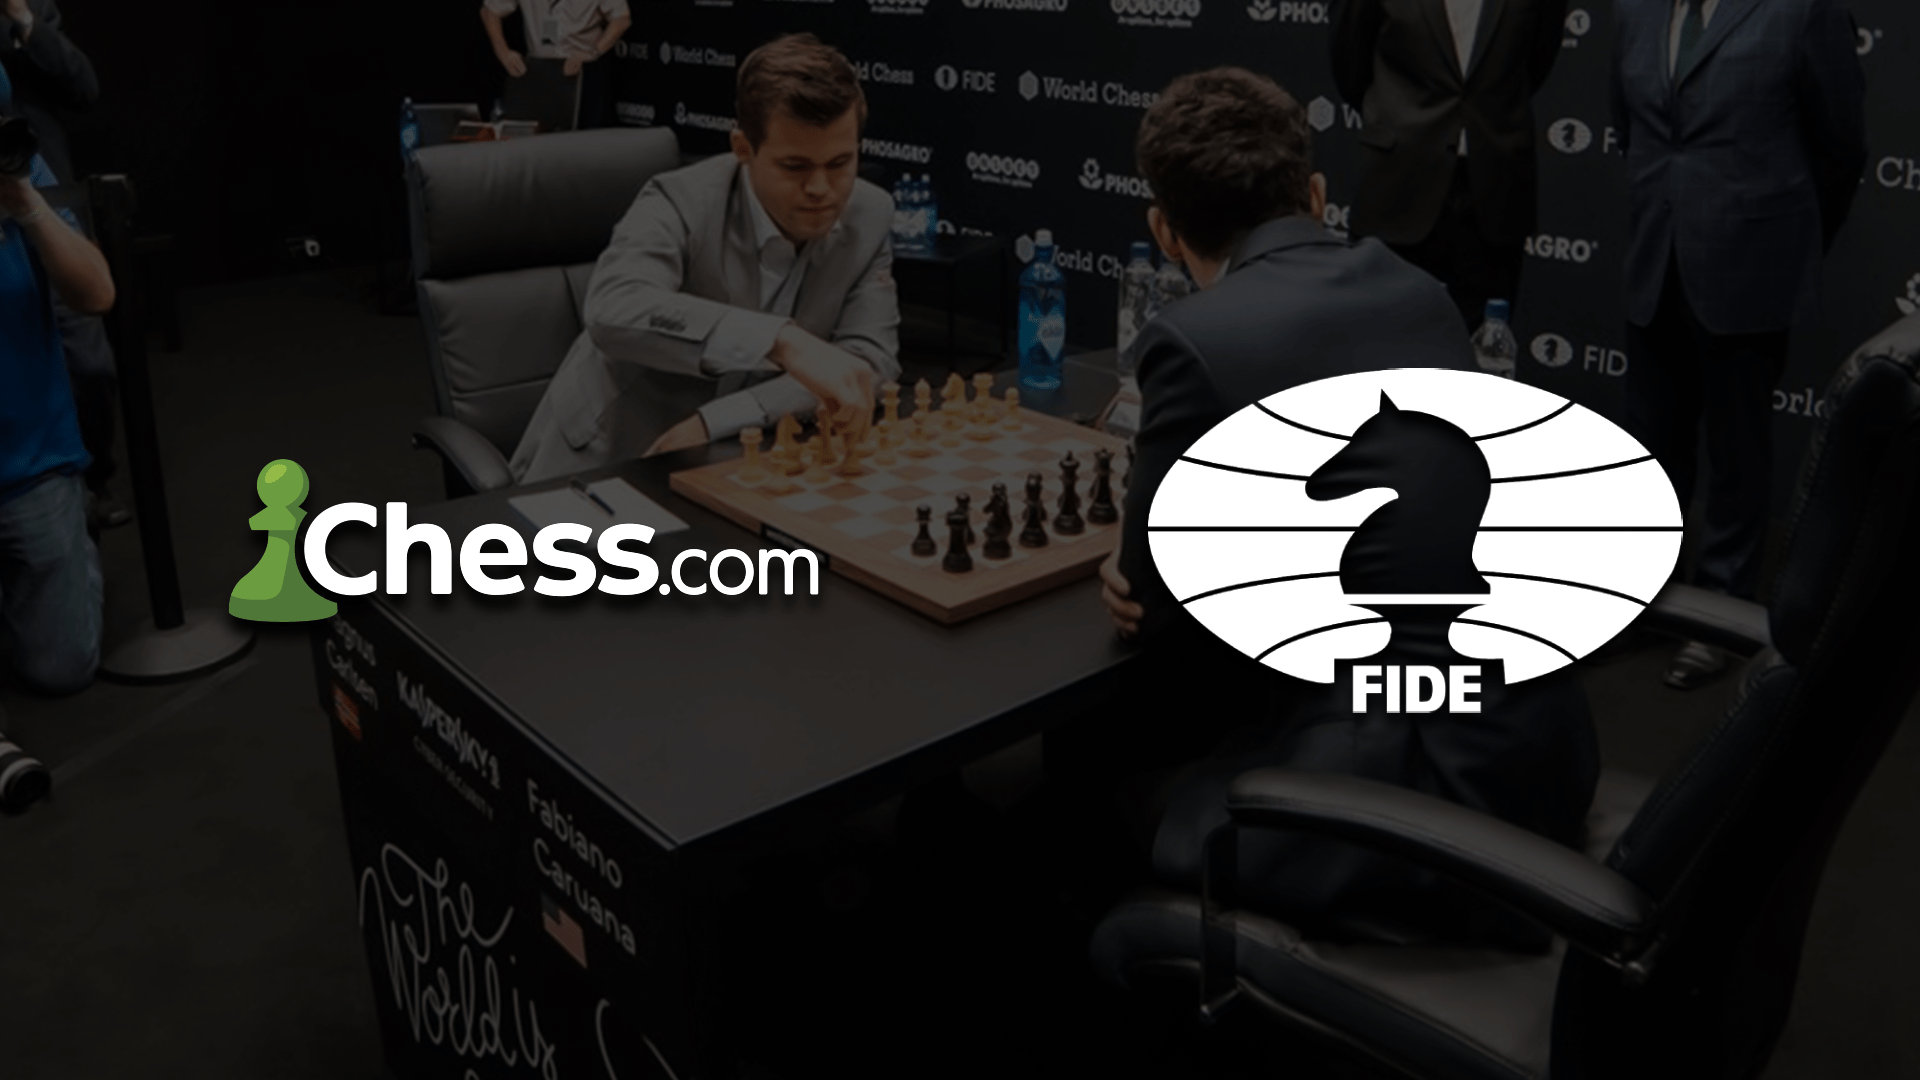 Acquires Broadcast Rights For Major FIDE Events Through 2023 